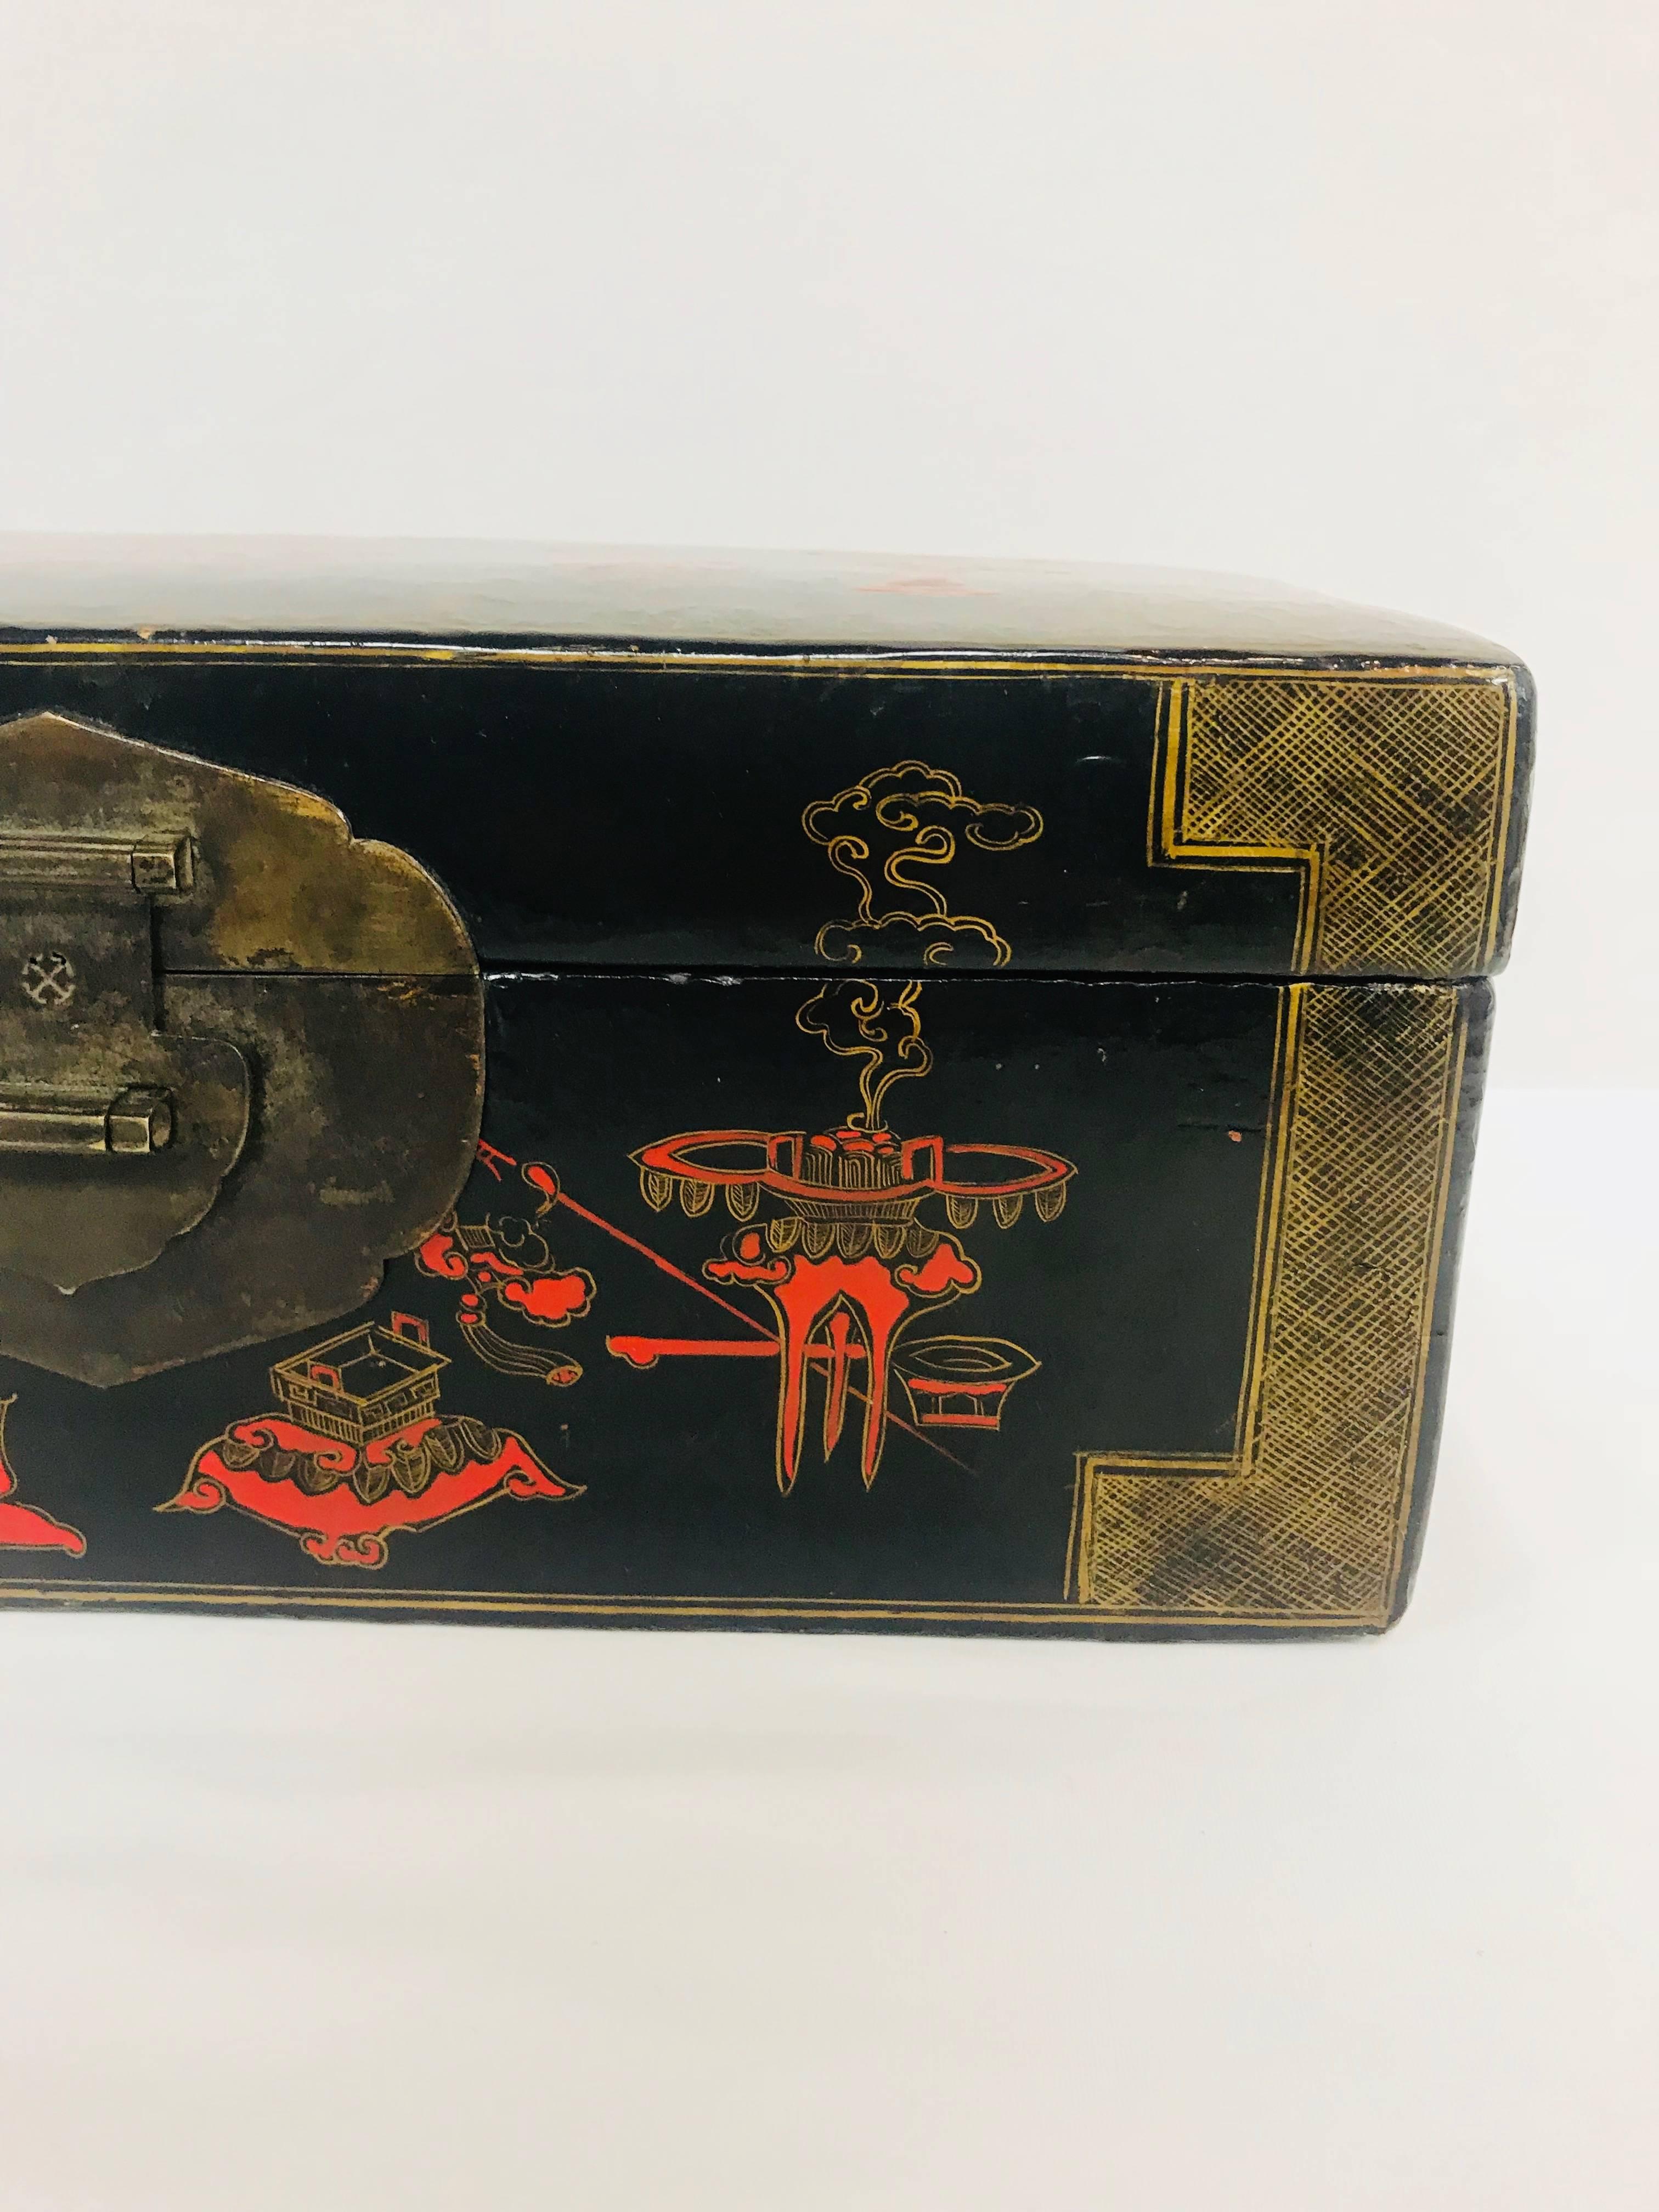 Black and Red Lacquer Asian Box For Sale 9